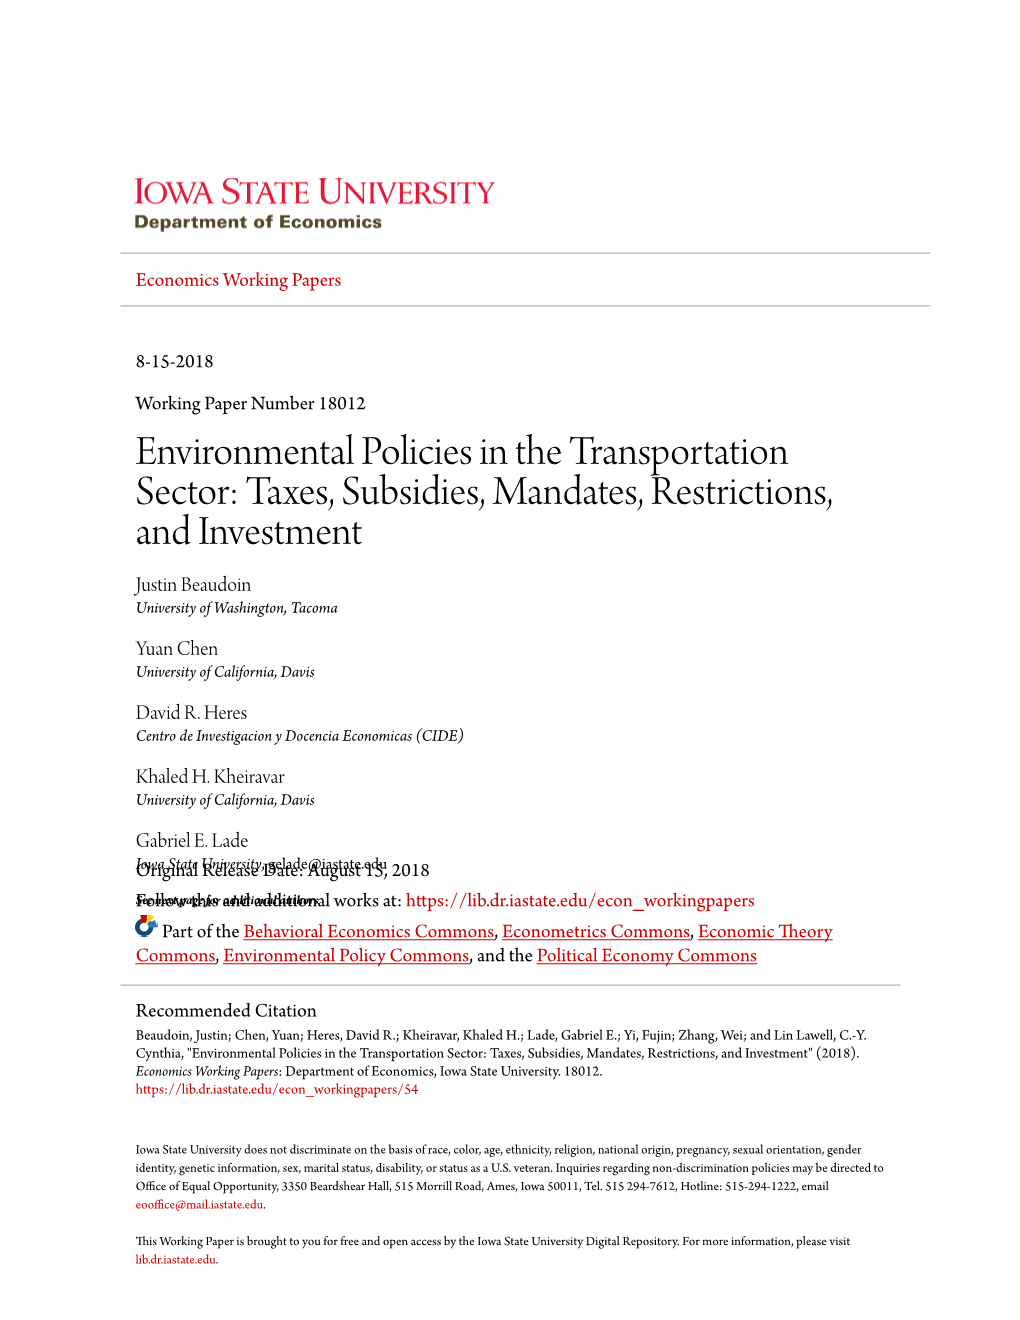 Environmental Policies in the Transportation Sector: Taxes, Subsidies, Mandates, Restrictions, and Investment Justin Beaudoin University of Washington, Tacoma